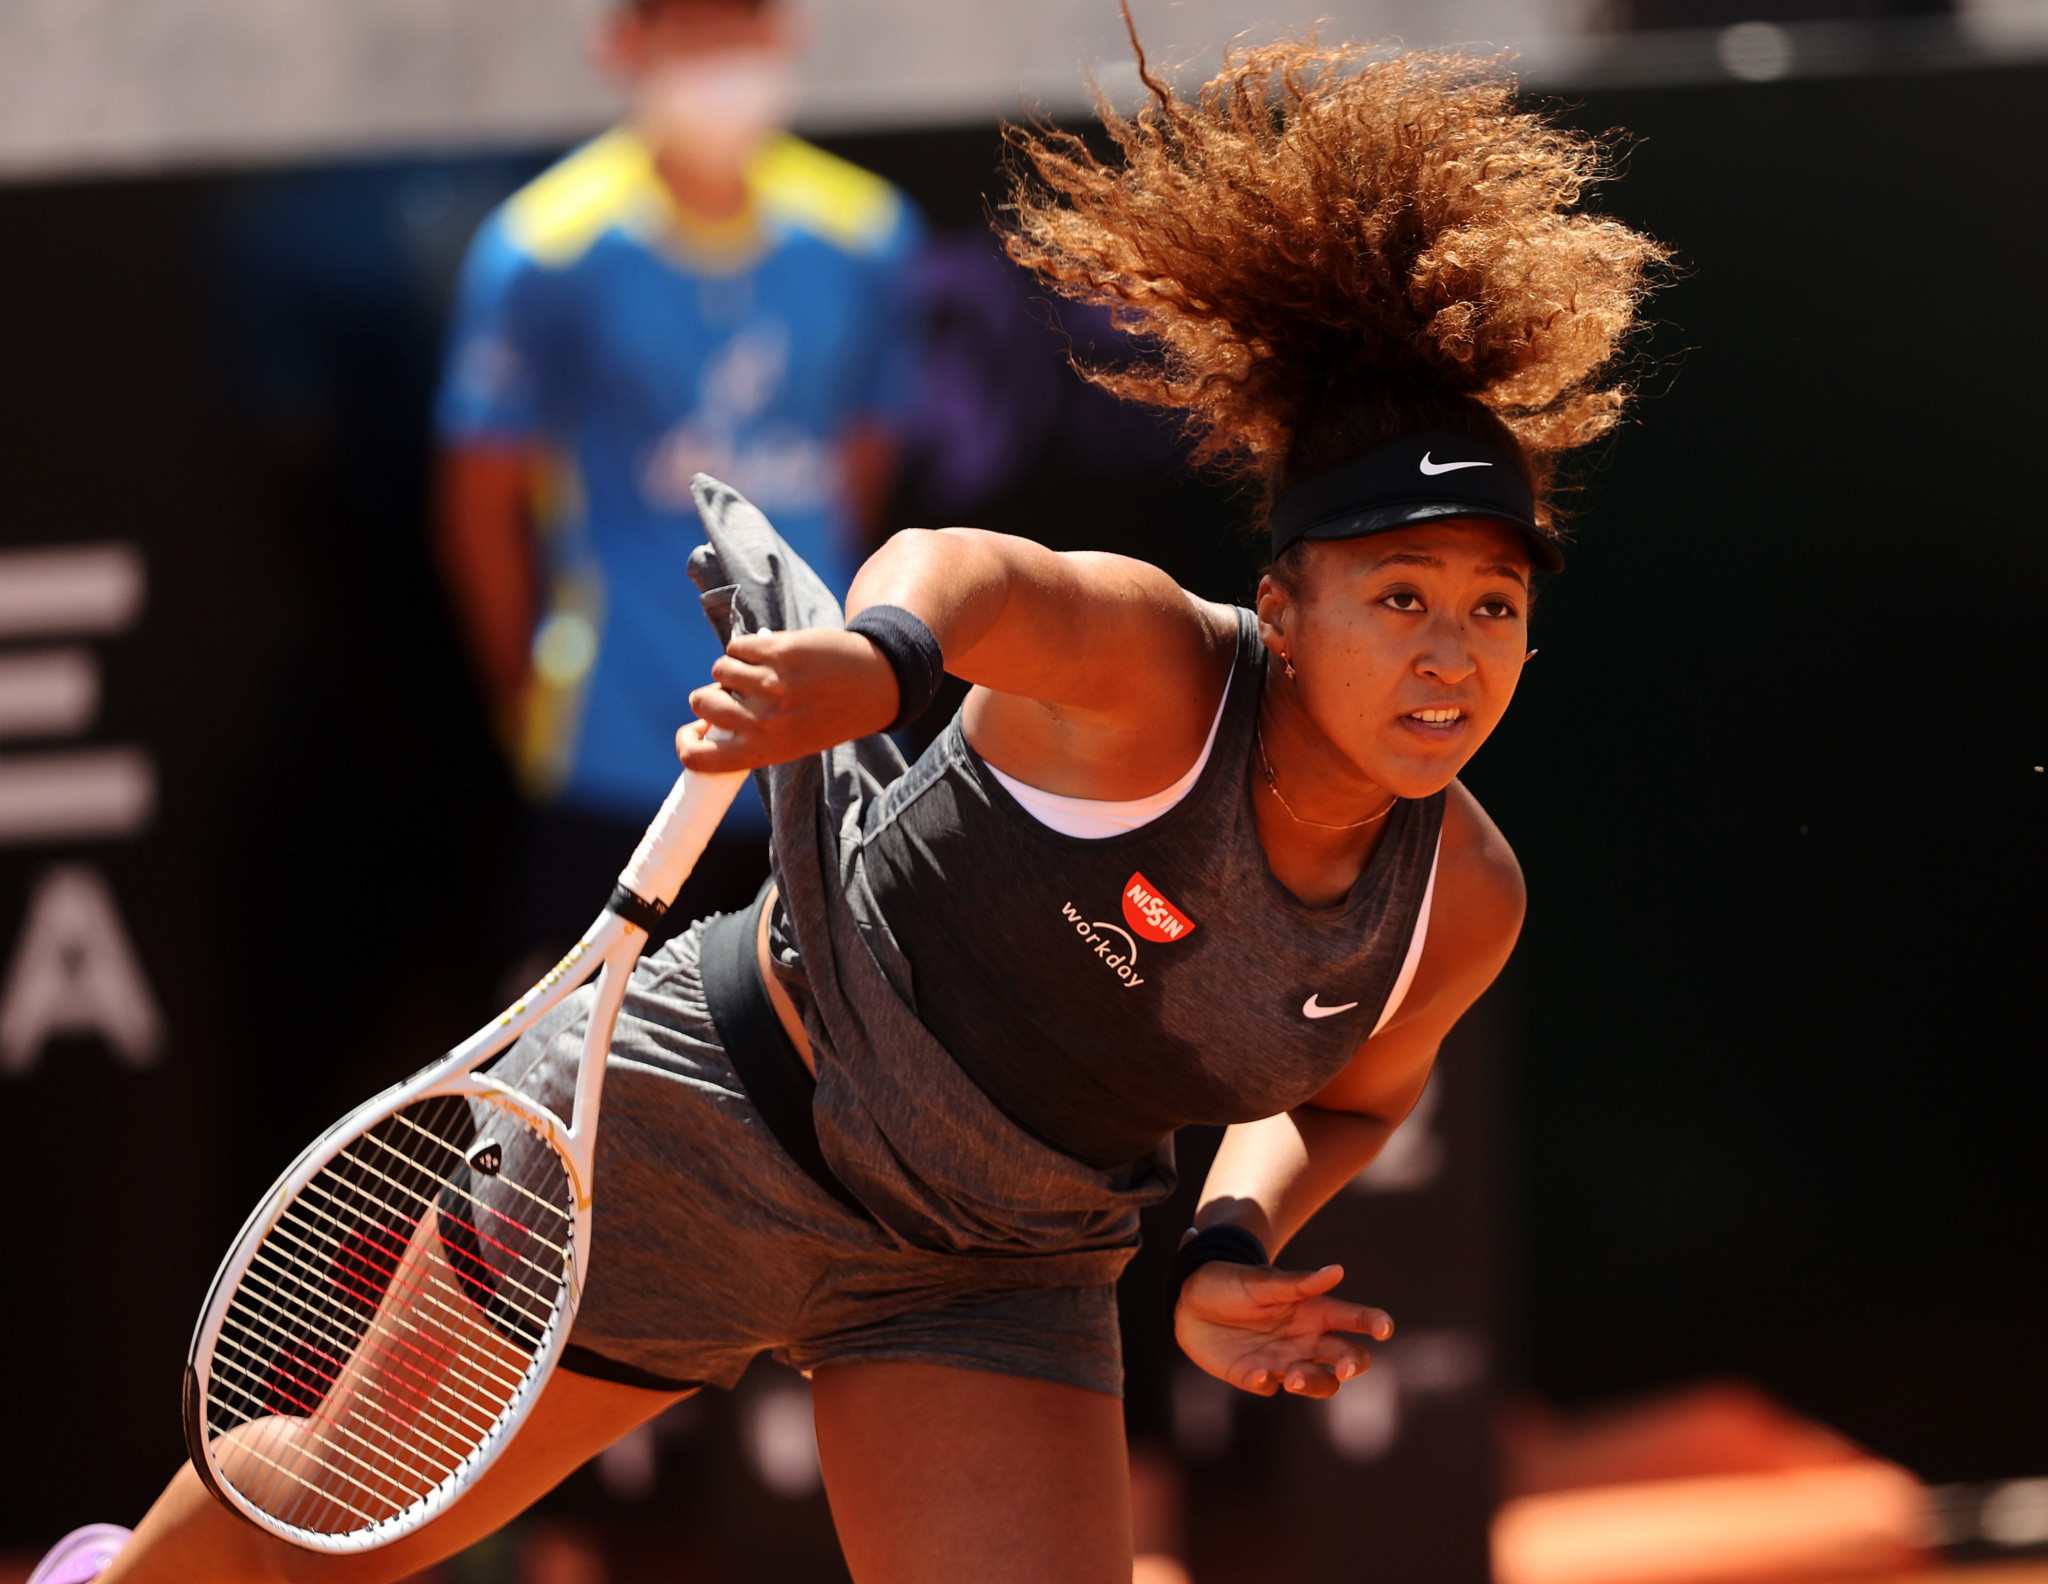 Naomi Osaka has decided not to carry out her media duties at the French Open, citing mental health concerns ©Getty Images